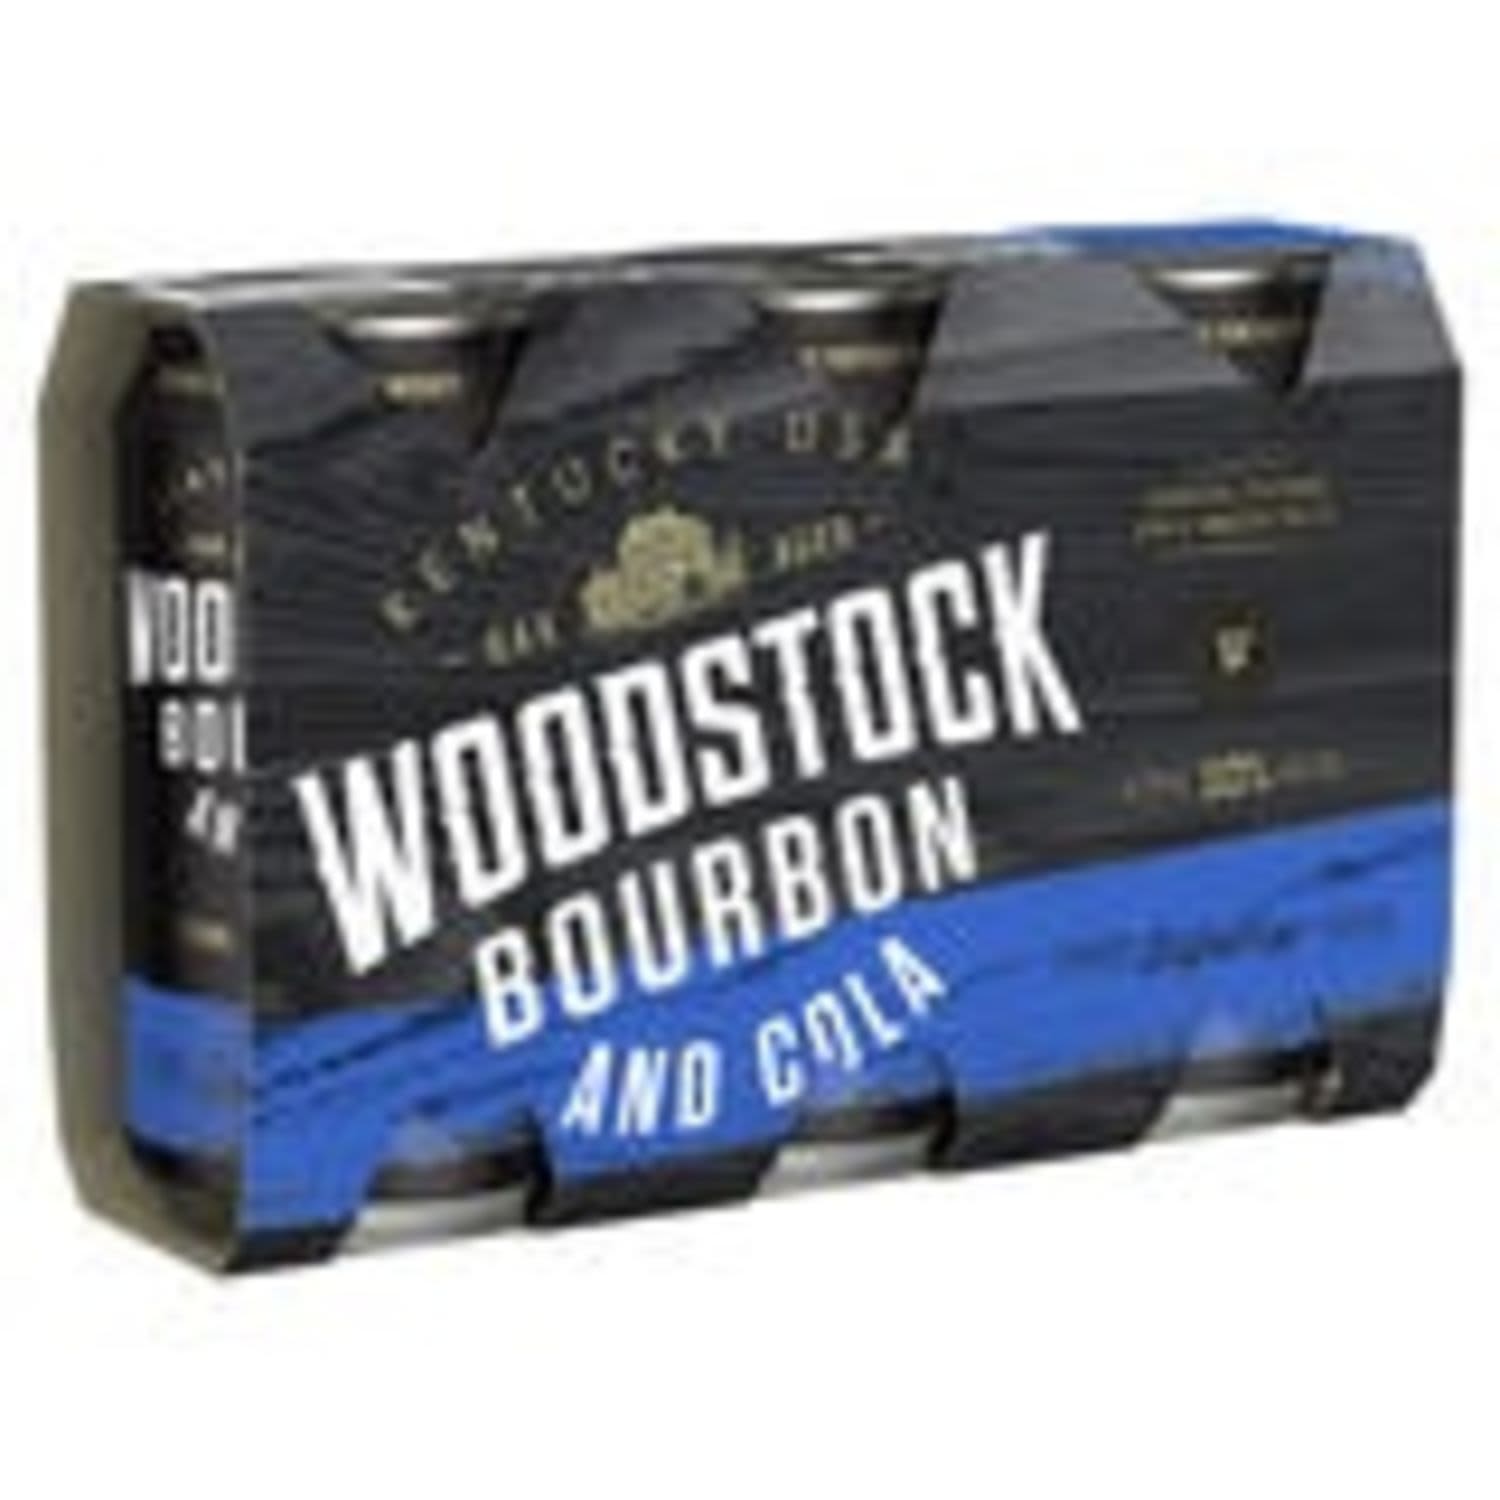 Woodstock Bourbon & Cola 10% Can 375mL 3 Pack